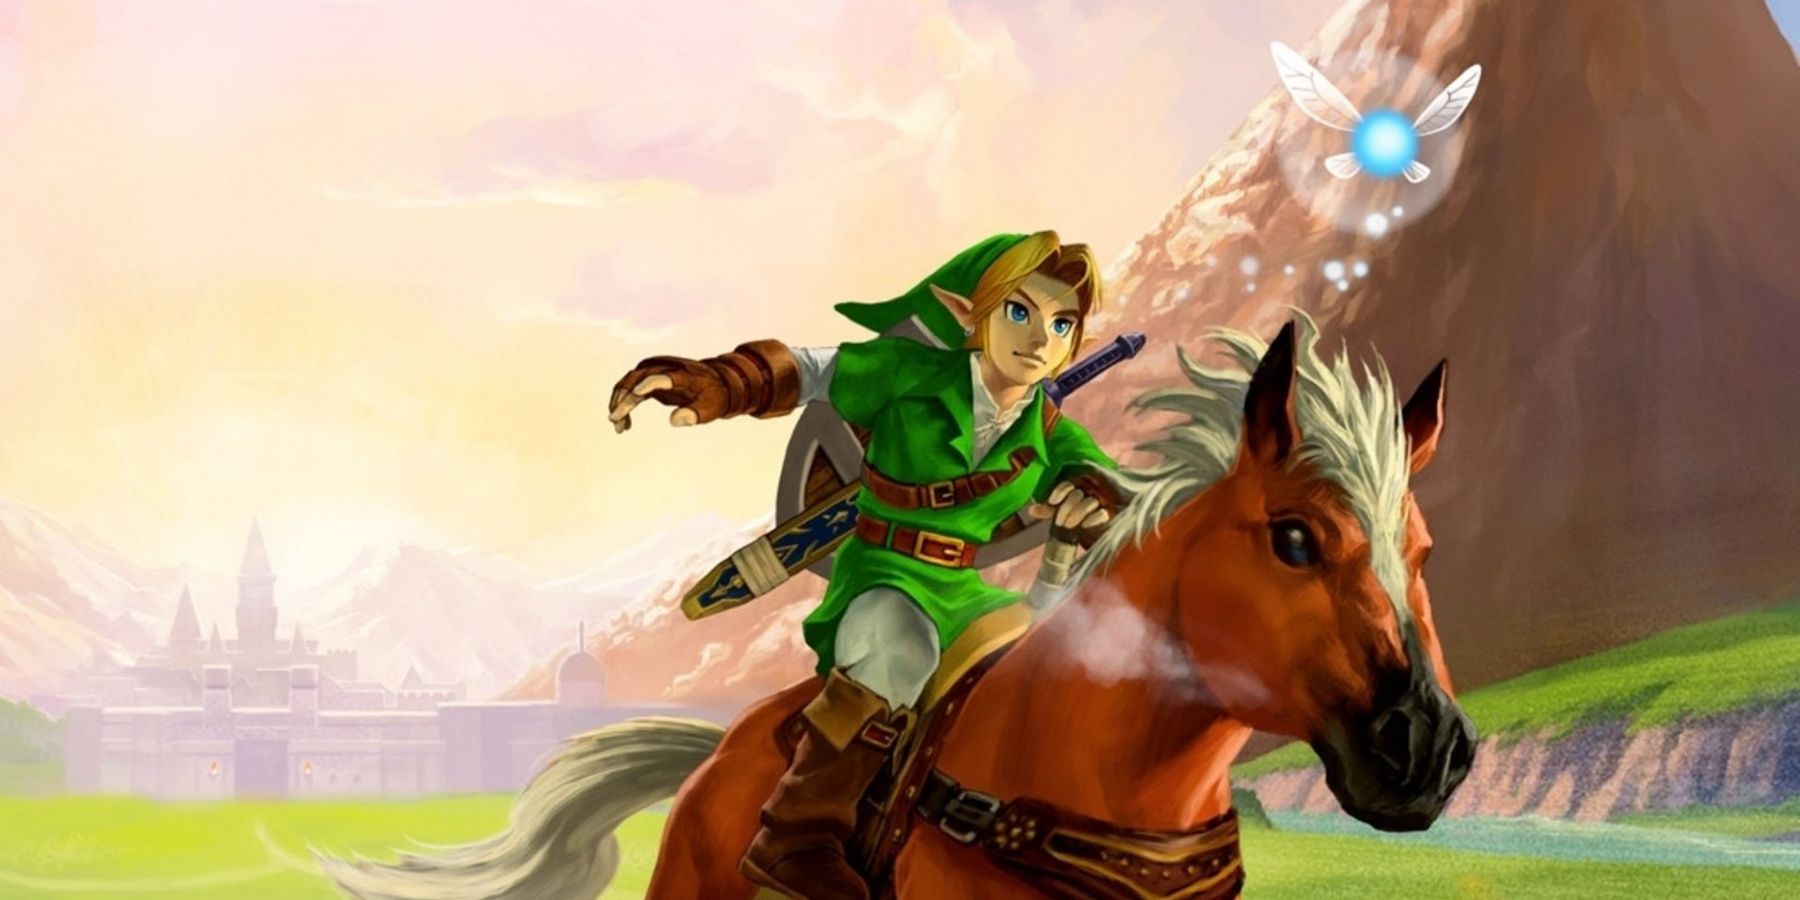 Link riding through Hyrule in Ocarina of Time